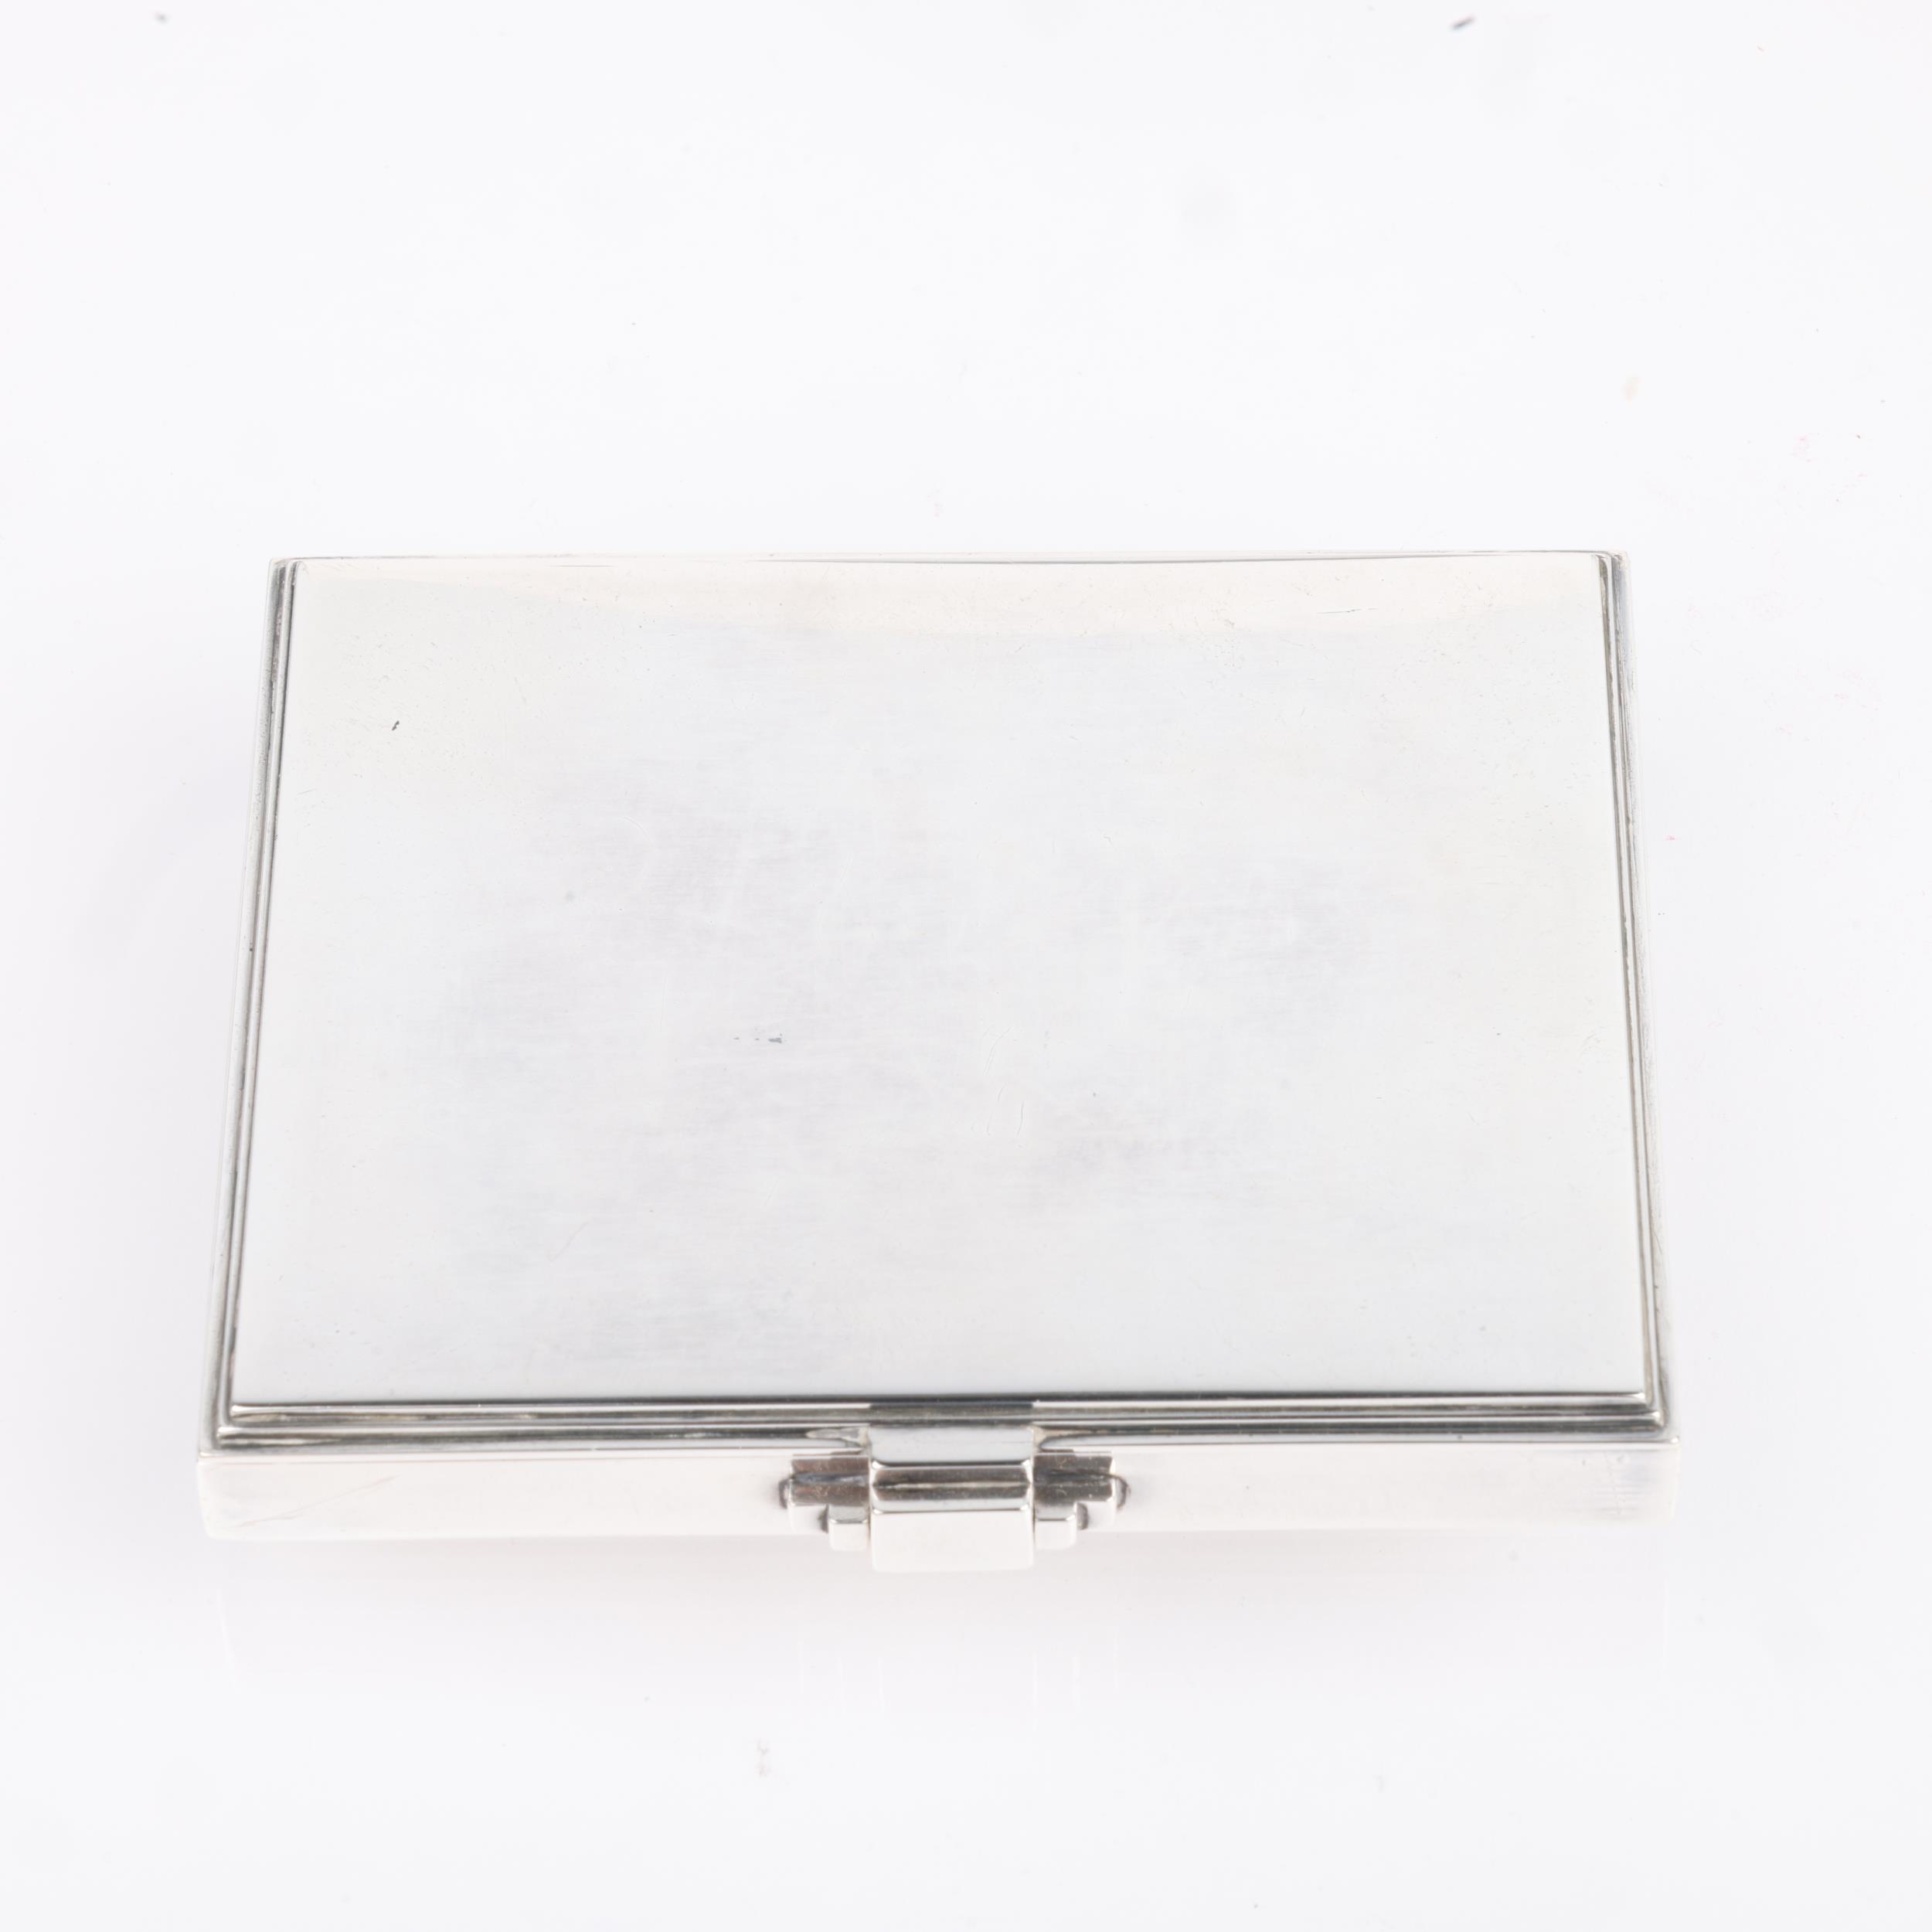 GEORG JENSEN - a heavy Danish modernist sterling silver 'Pyramid' cigarette case, designed by Harald - Image 2 of 3